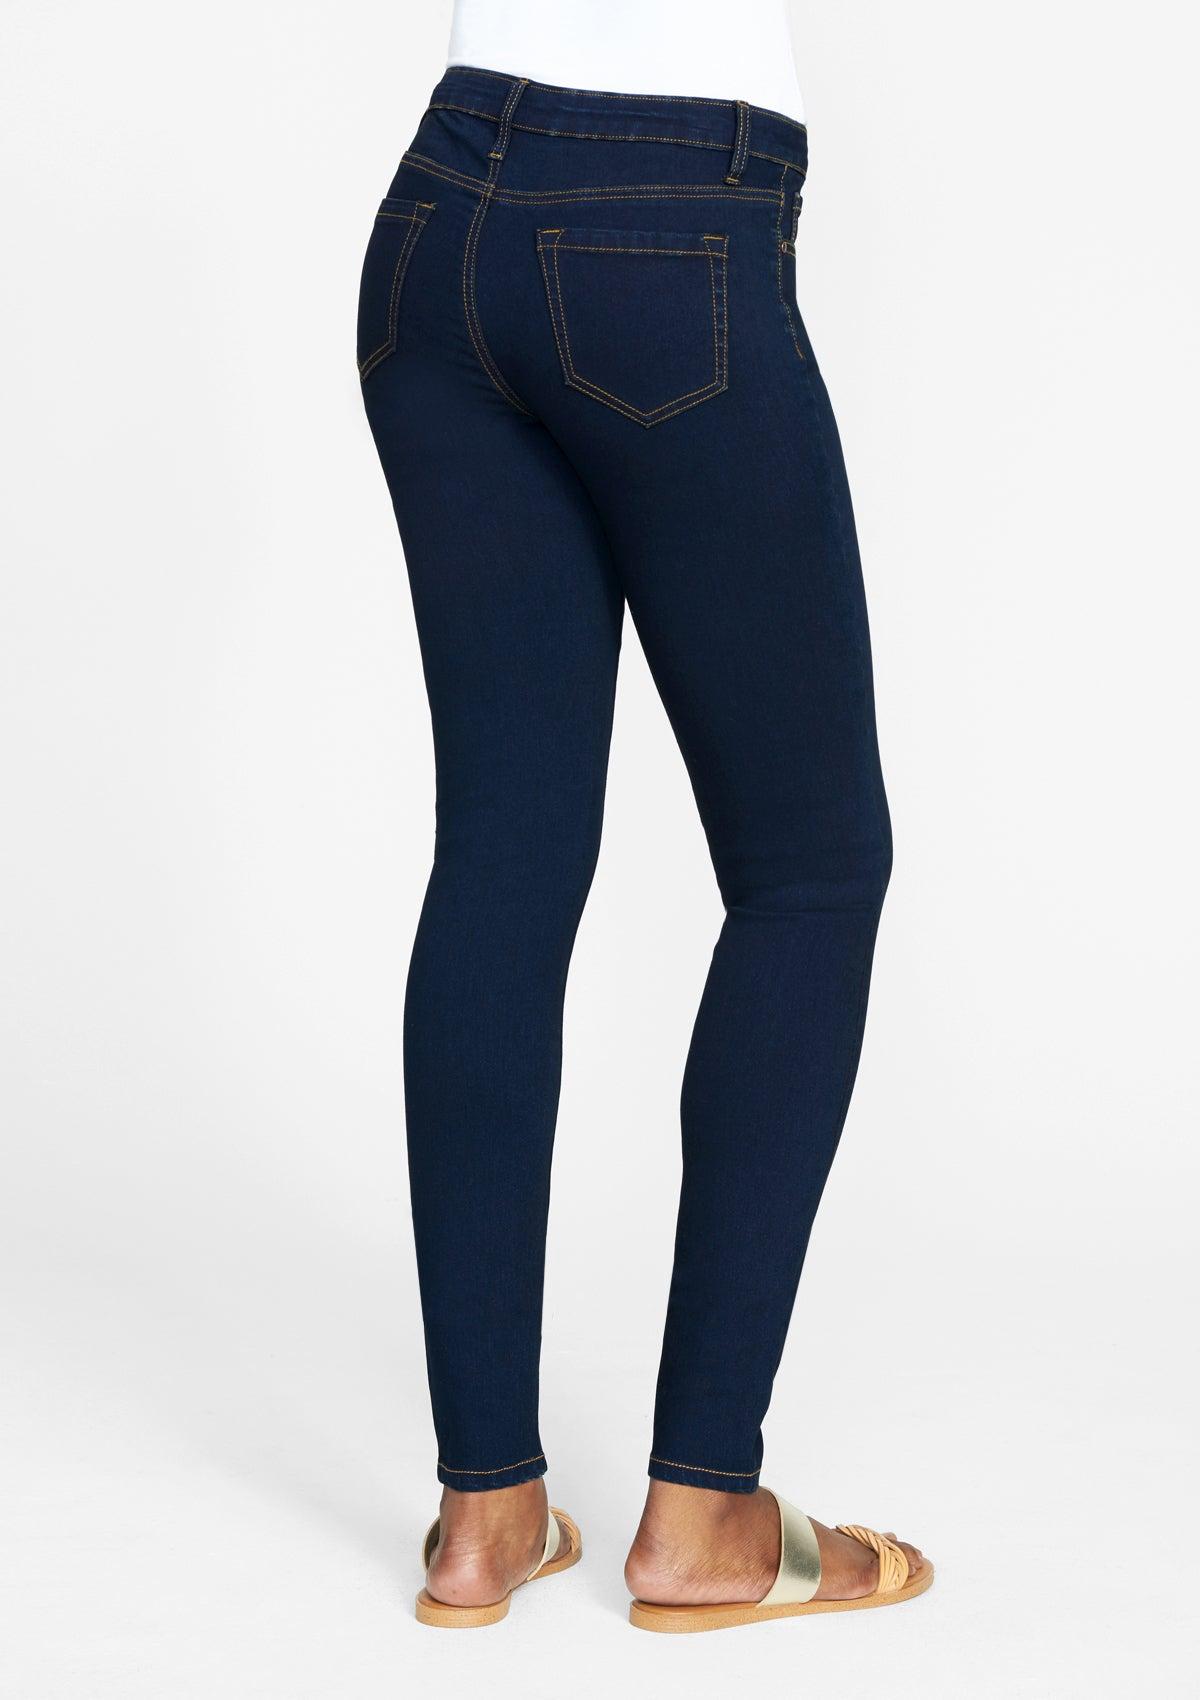 Tall Limited Edition Siena Skinny Jeans